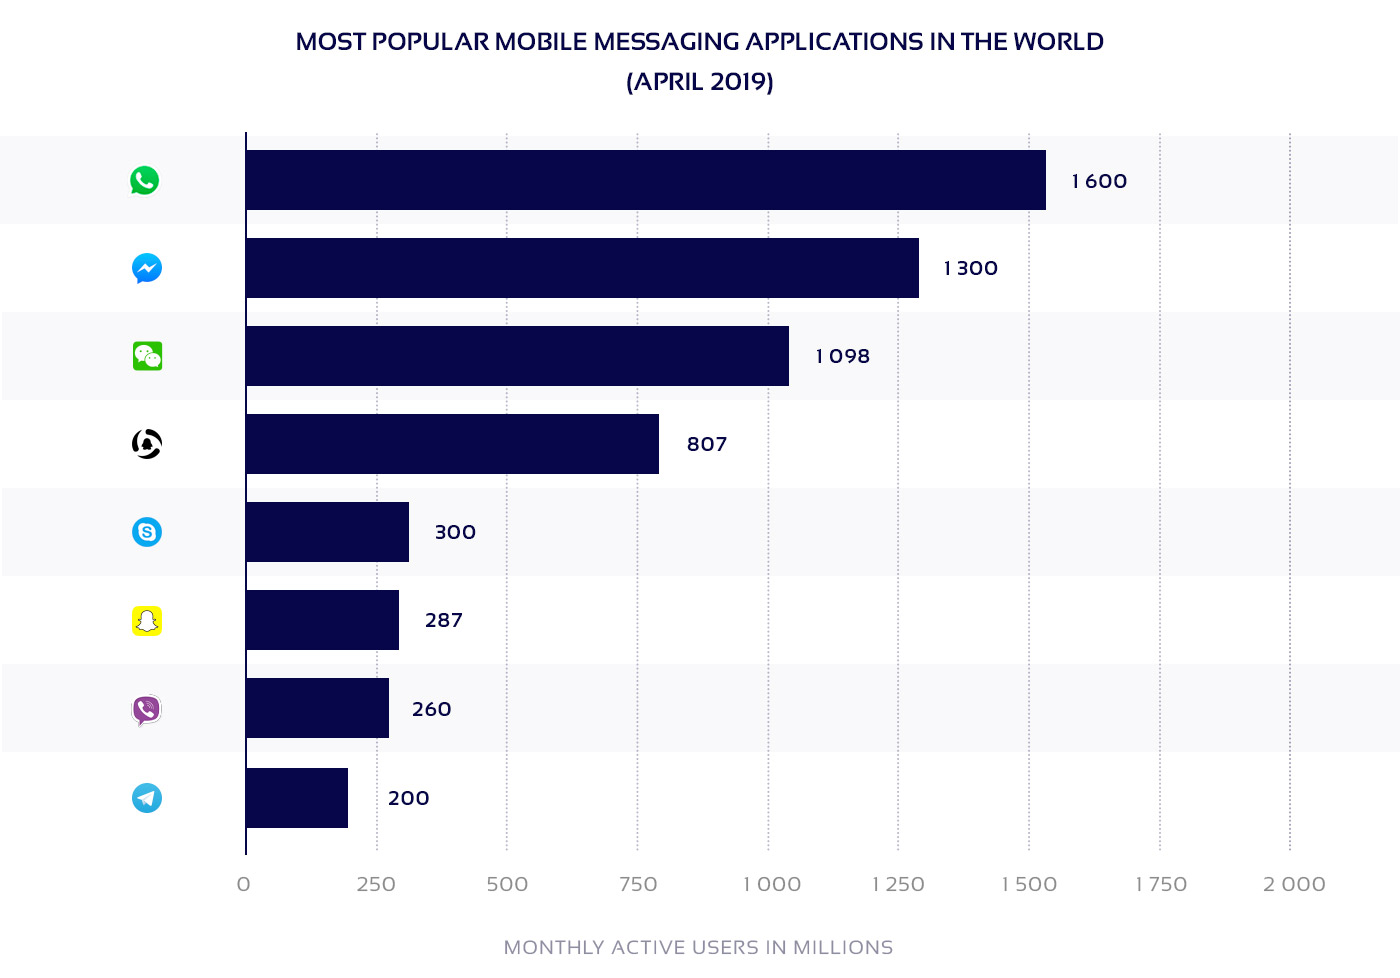 Chart of top 8 popular mobile messaging apps in the world as of April 2019